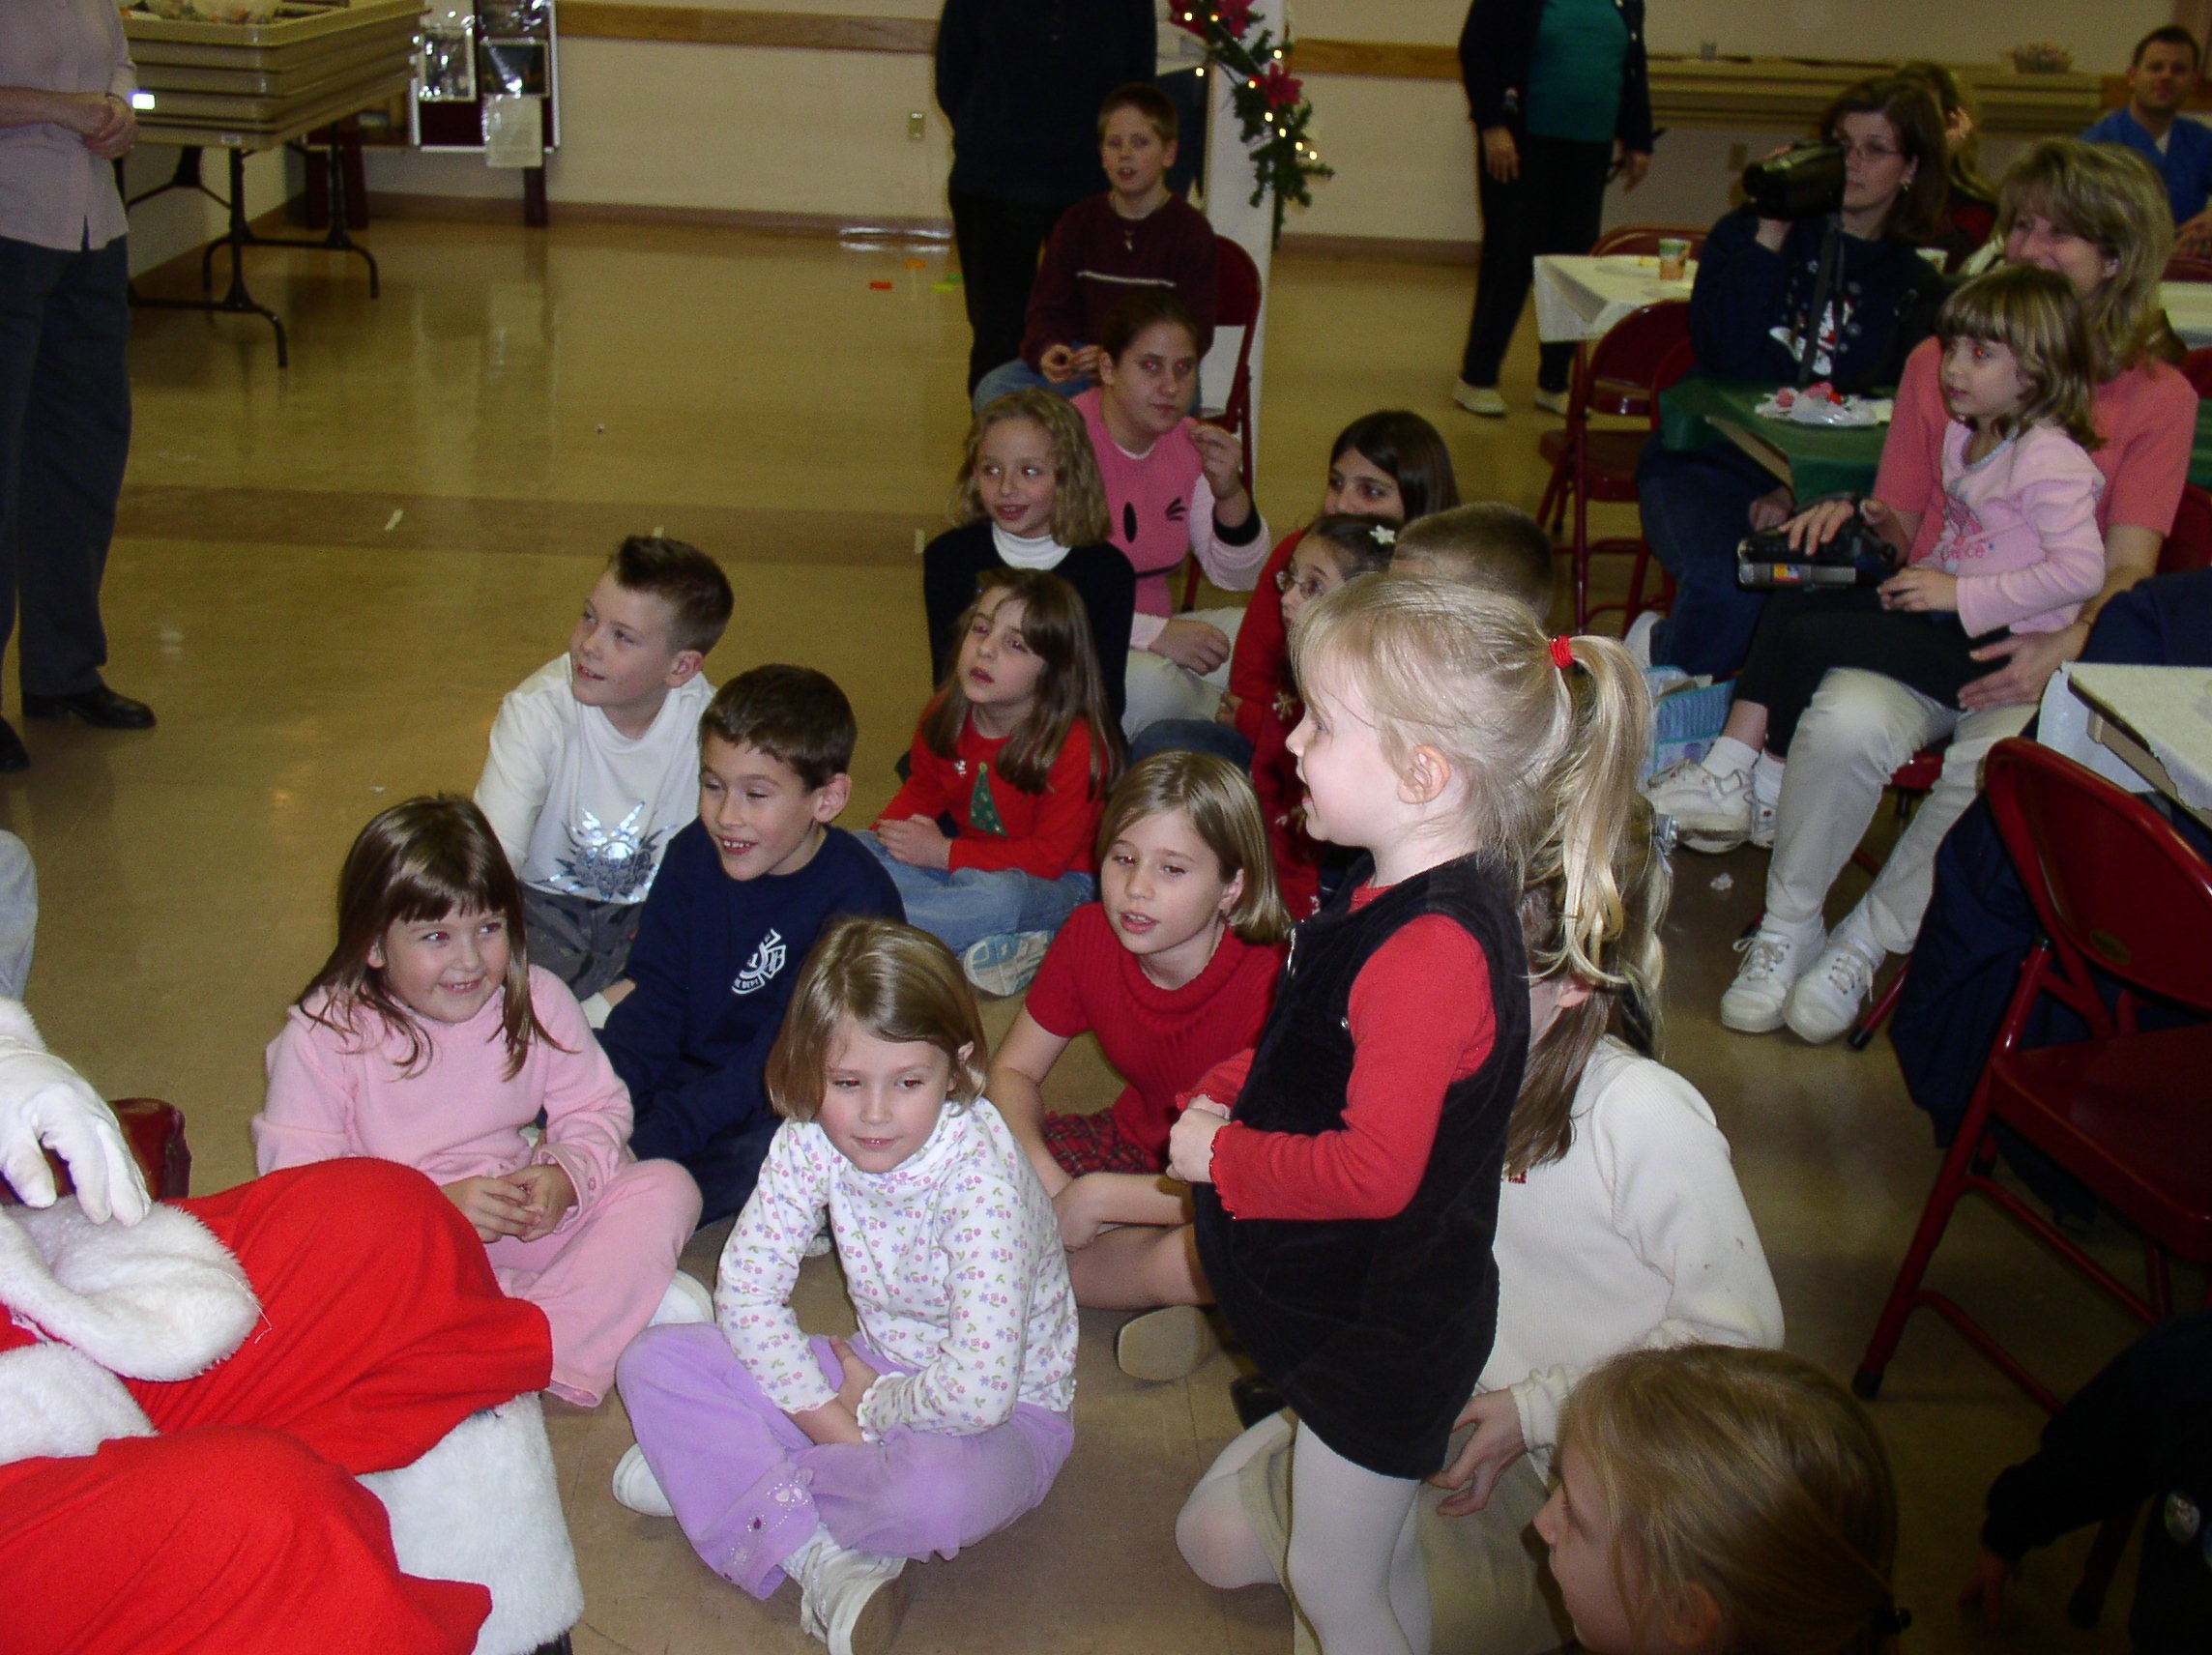 12-10-04  Other - Childrens Christmas Party